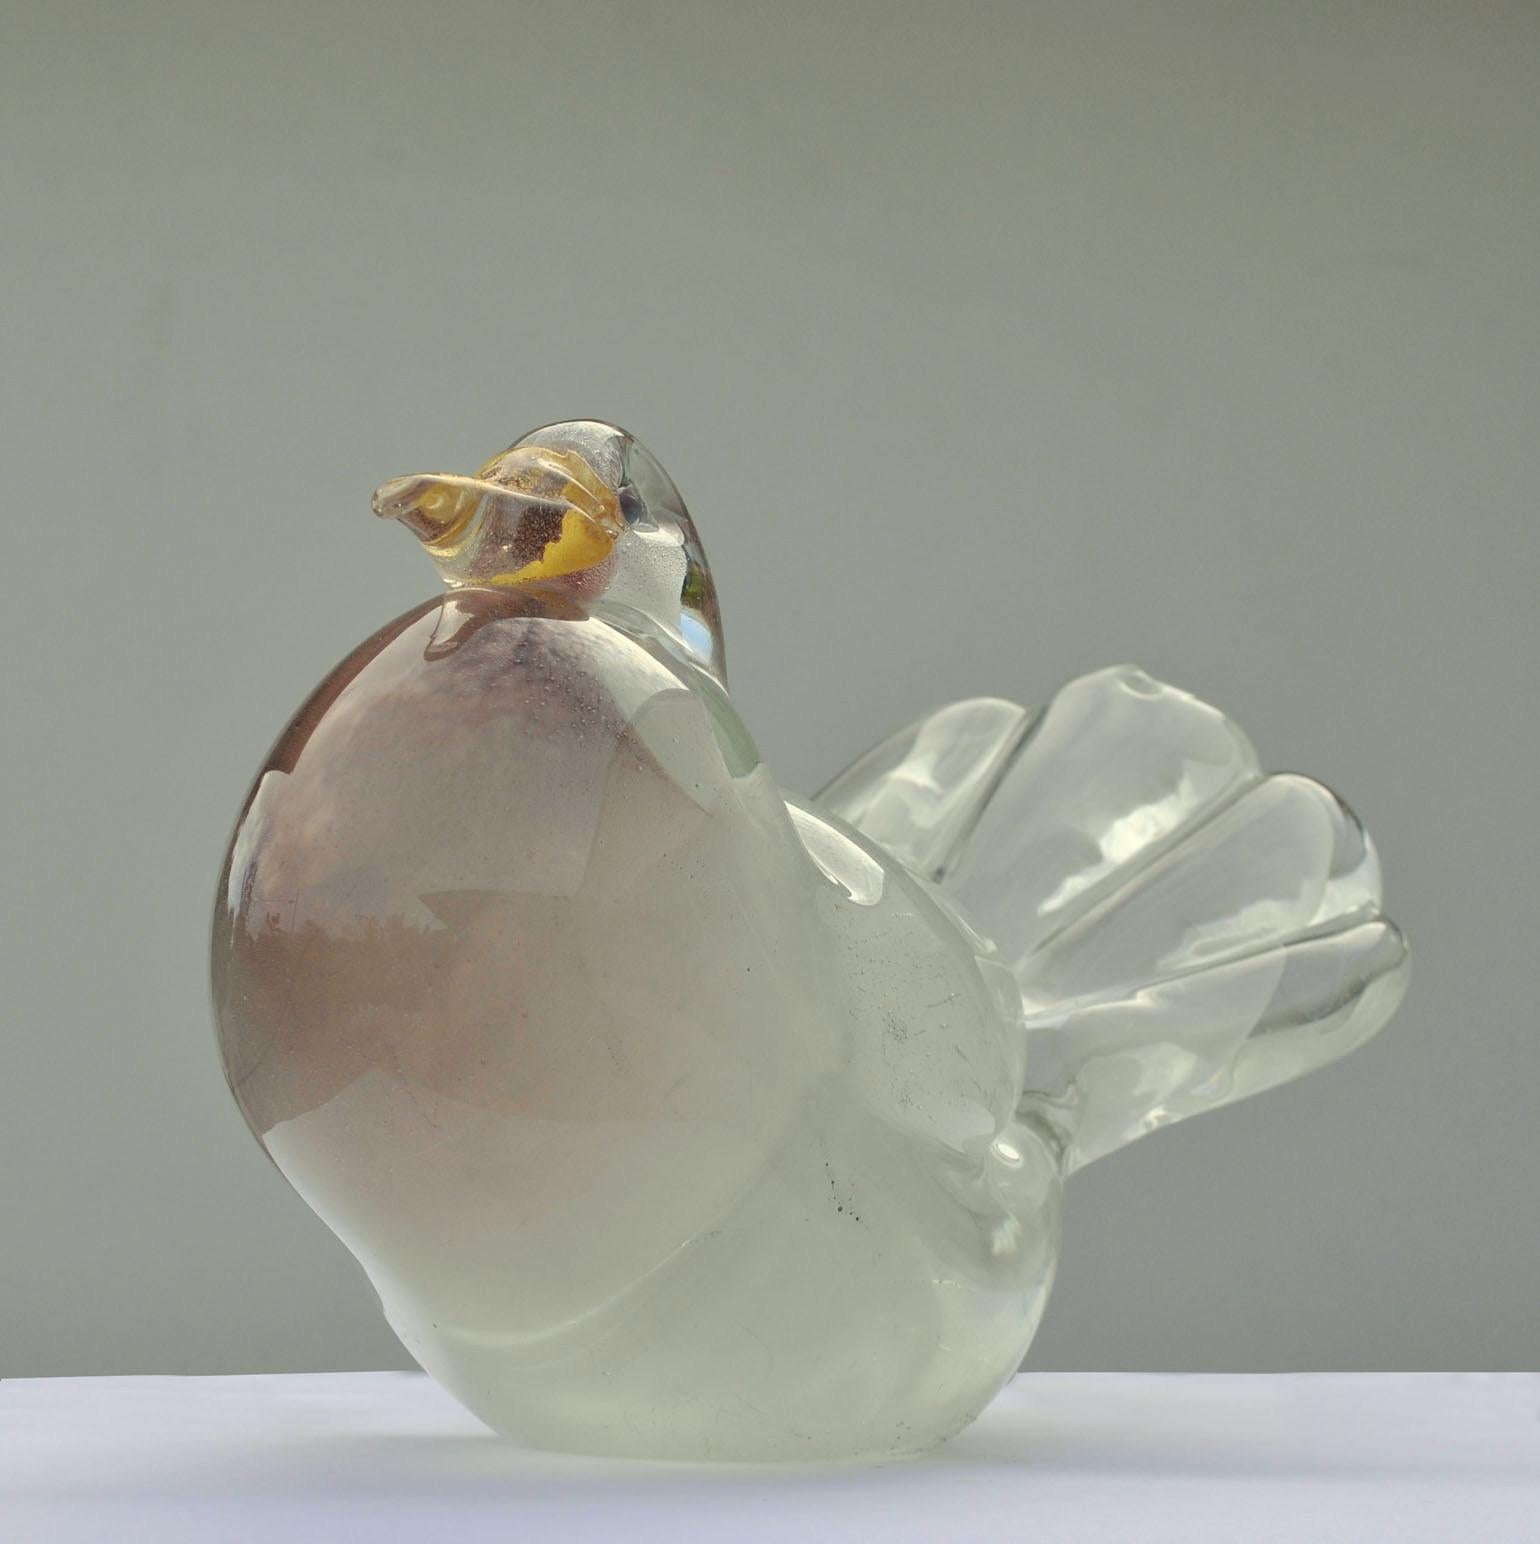 Milk white, clear and purple dove sculpture with gold beak and spread out wings and gold leaf beak is shaped in glass while hot. Attributed to Archimede Seguso, Italy, 1950s.